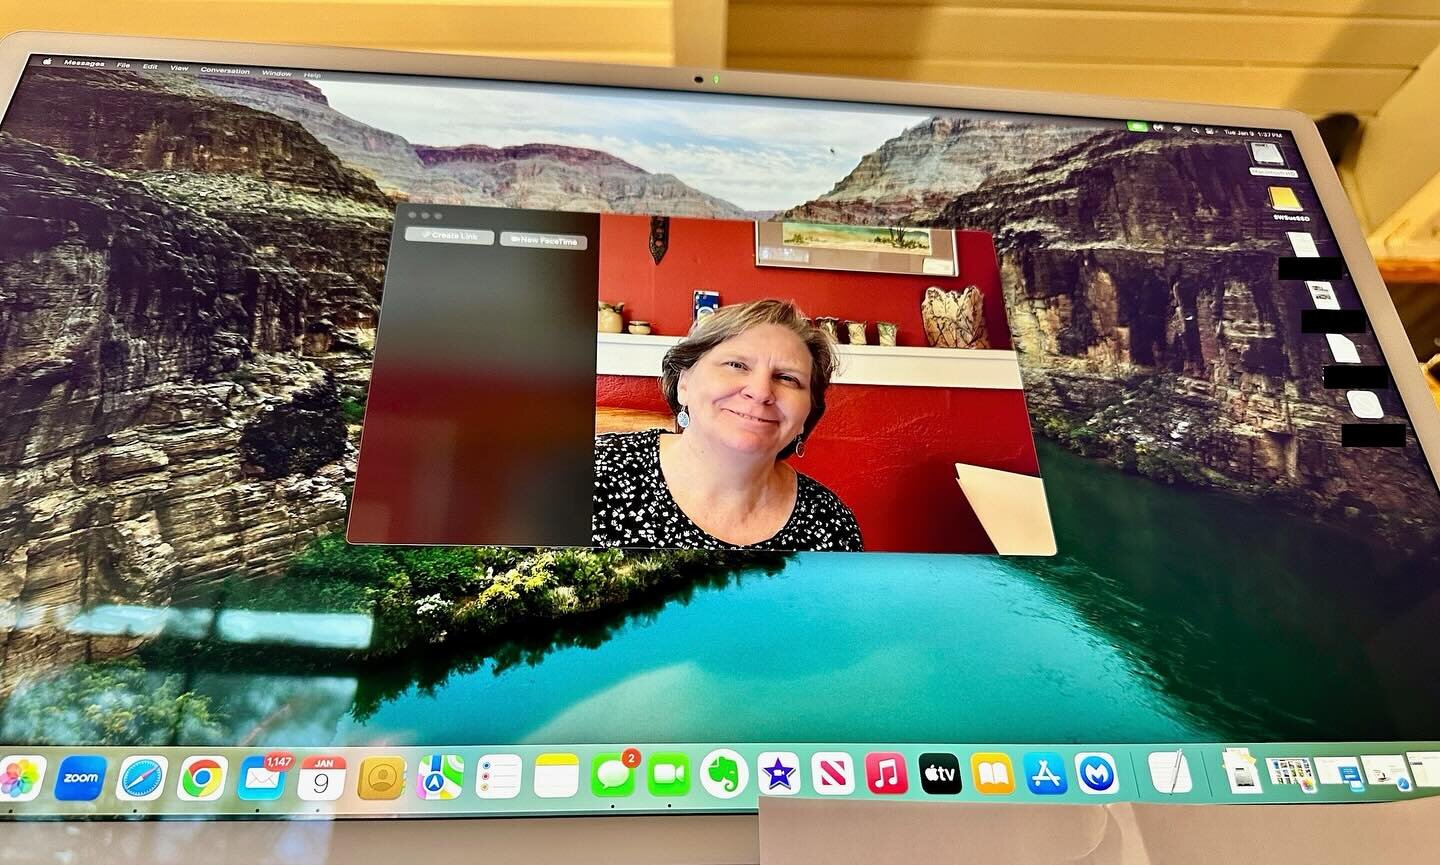 Hello there. Just Sue testing out a new iMac. Making sure the FaceTime camera is working properly. Say Cheese! #newiMac #computersetup #wecanhelp